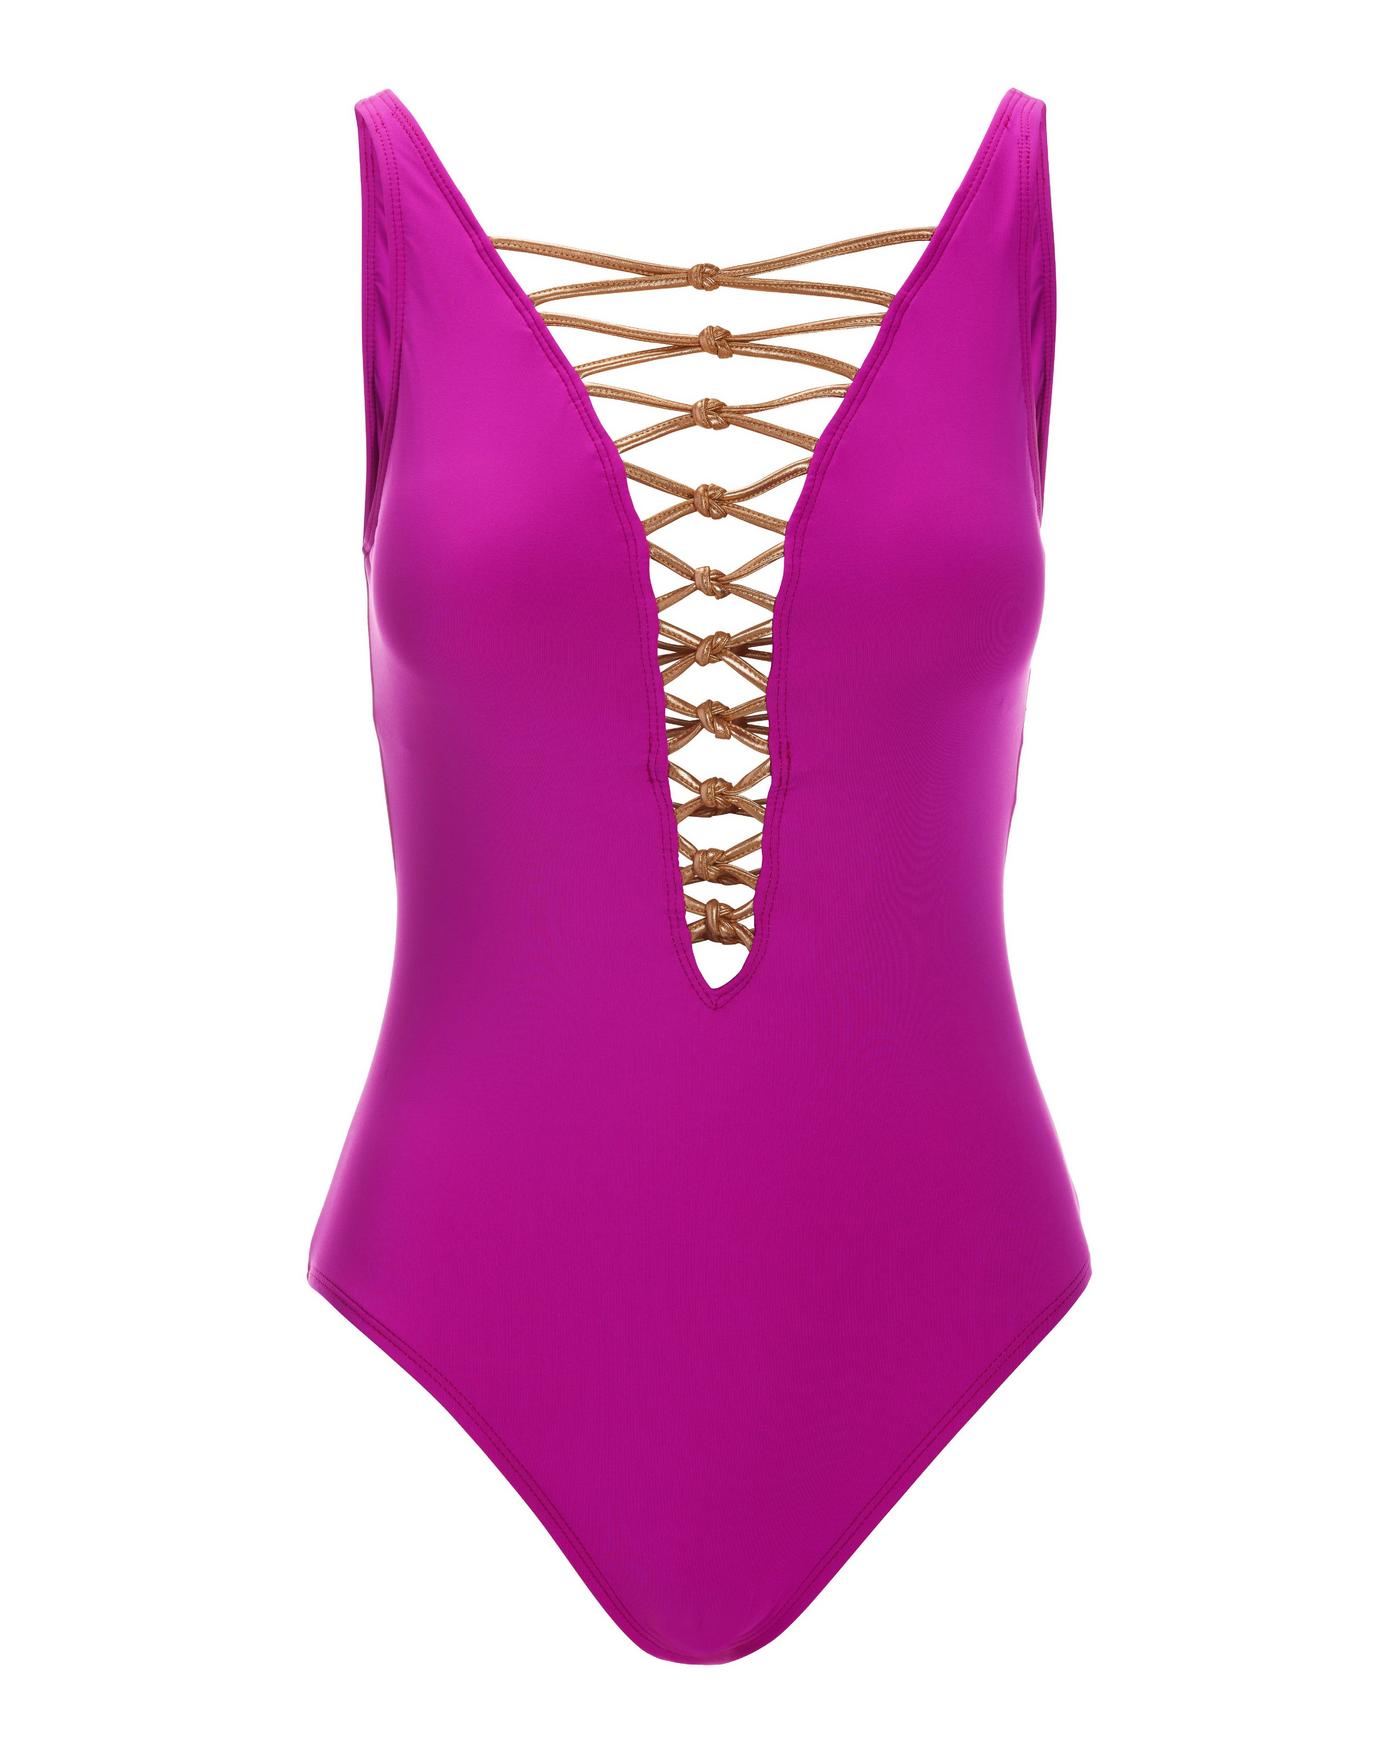 110 Creations: Pink Lace Swimsuit: In-Depth Review